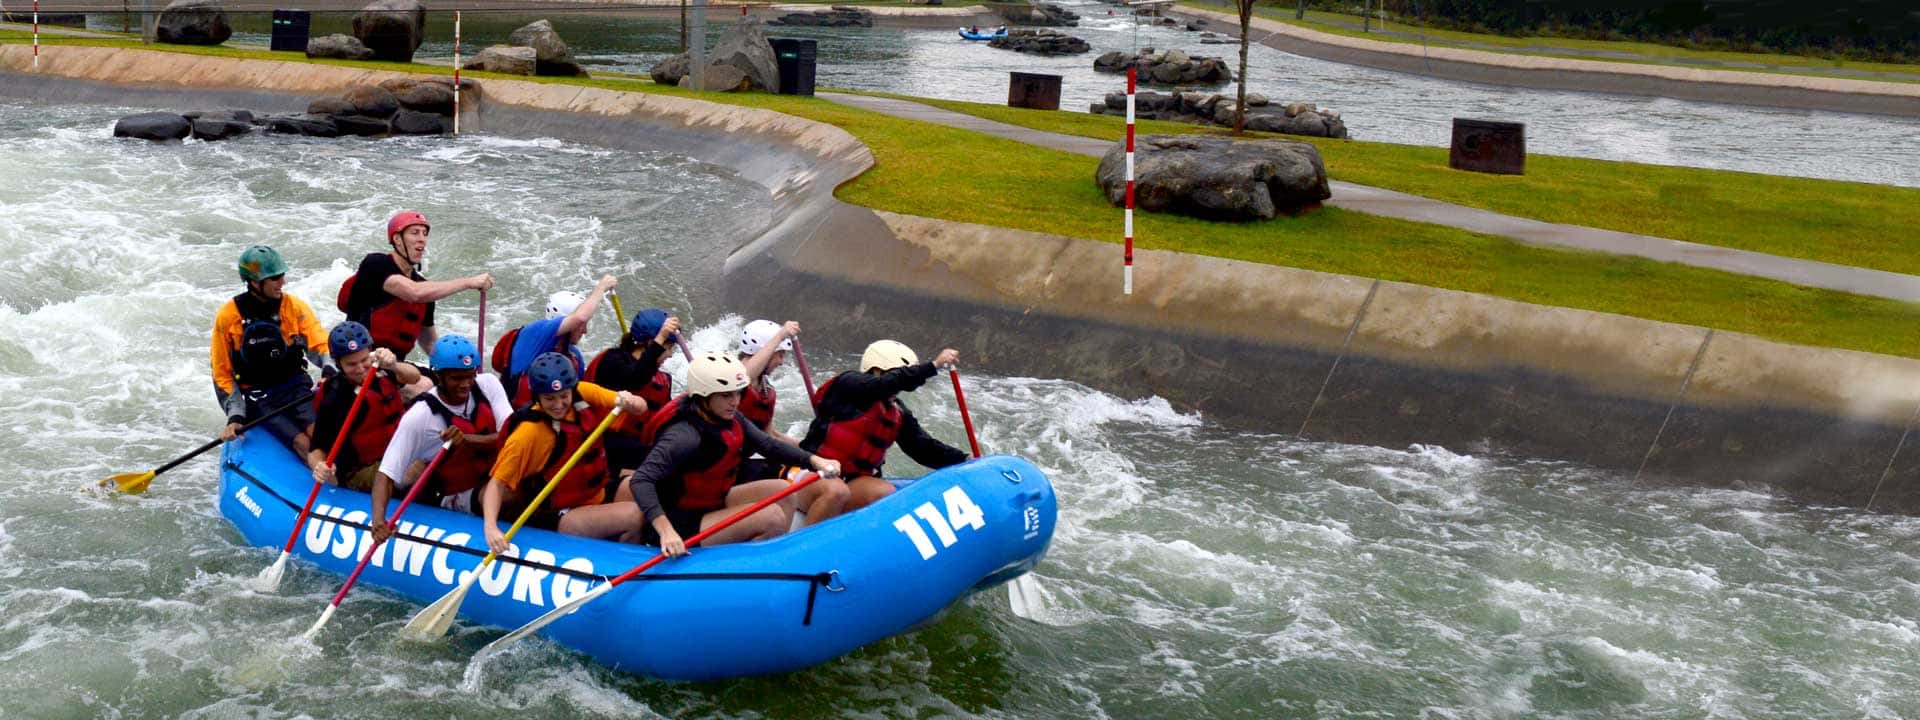 Rafting at the U.S. National Whitewater Center